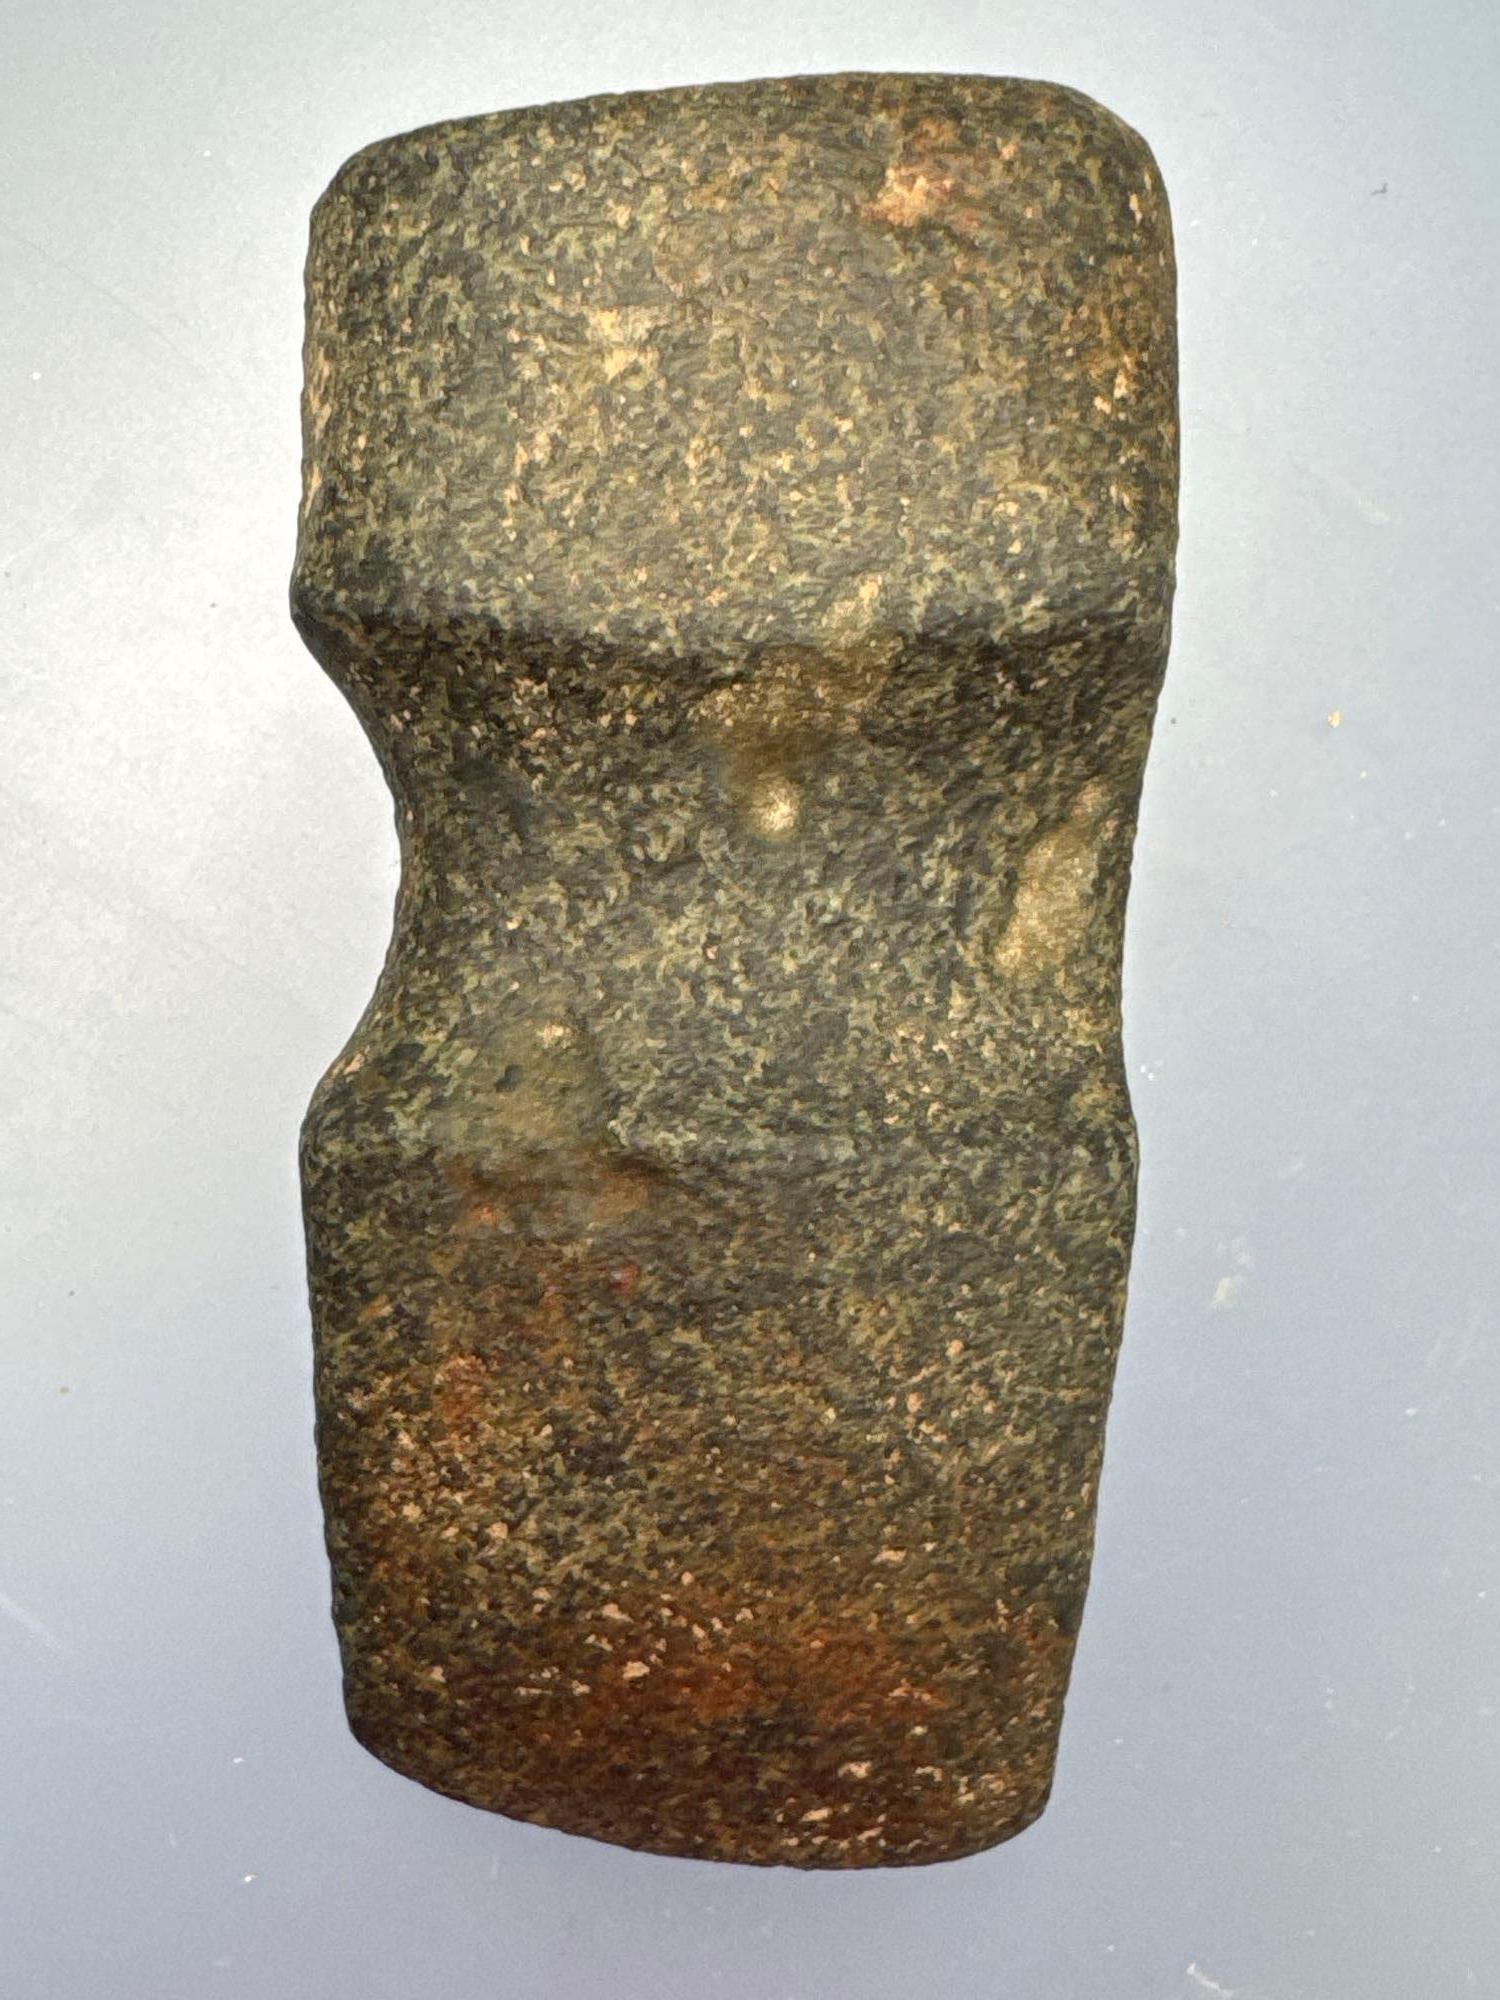 4" Axe, 3/4 Groove, SITS ON END, Found in St. Louis Co., MO, Ex: Rich Becker of Highland Illinois